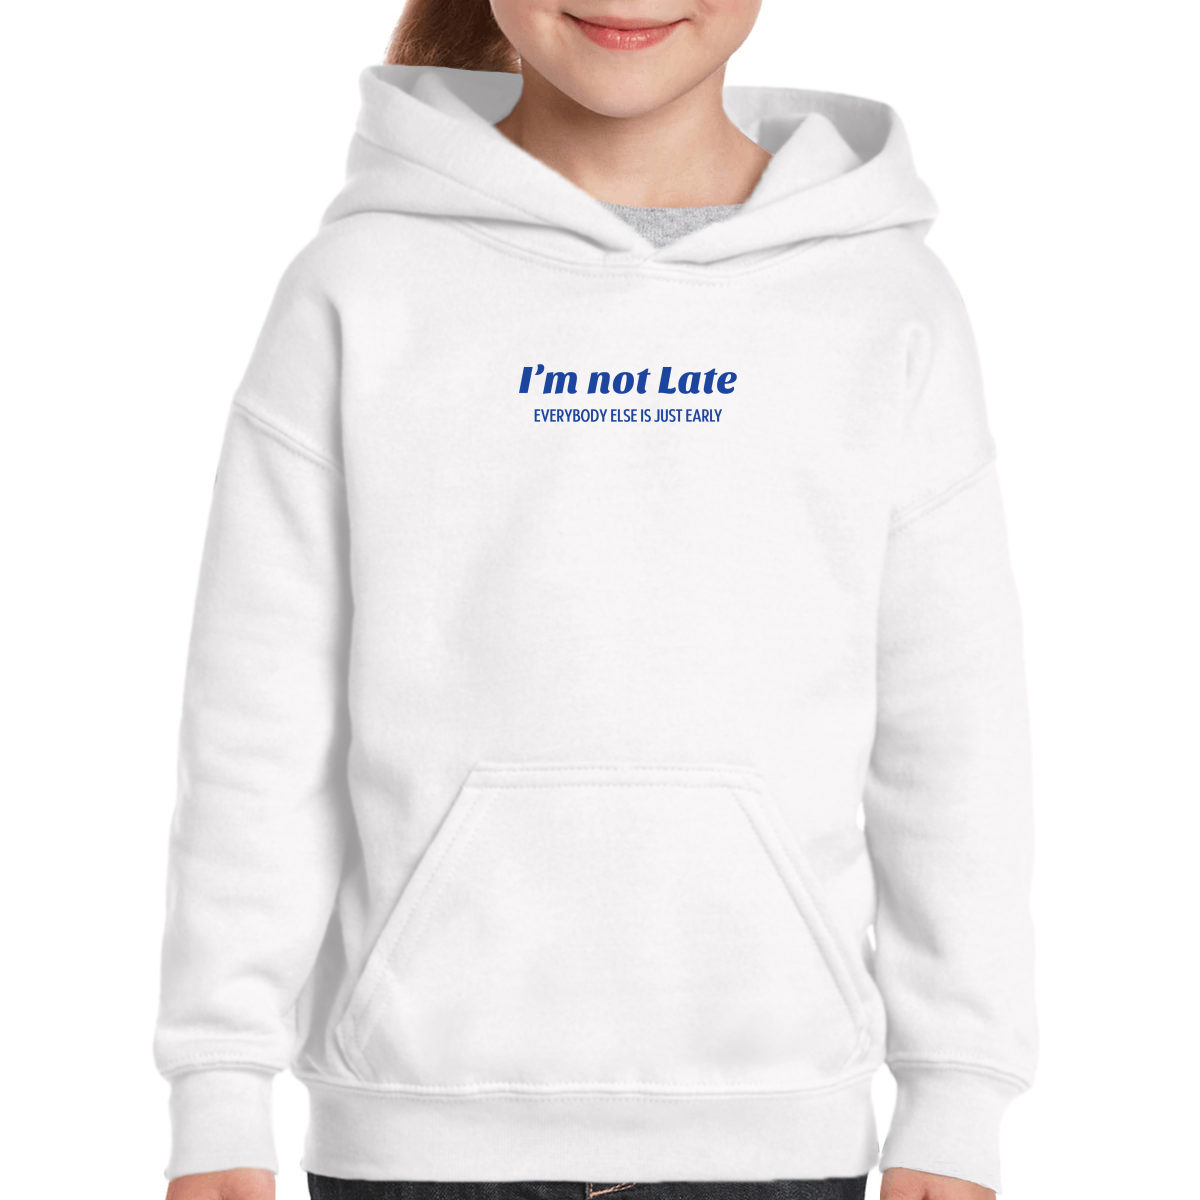 I’m not late everybody else is just early Kids Hoodie | White